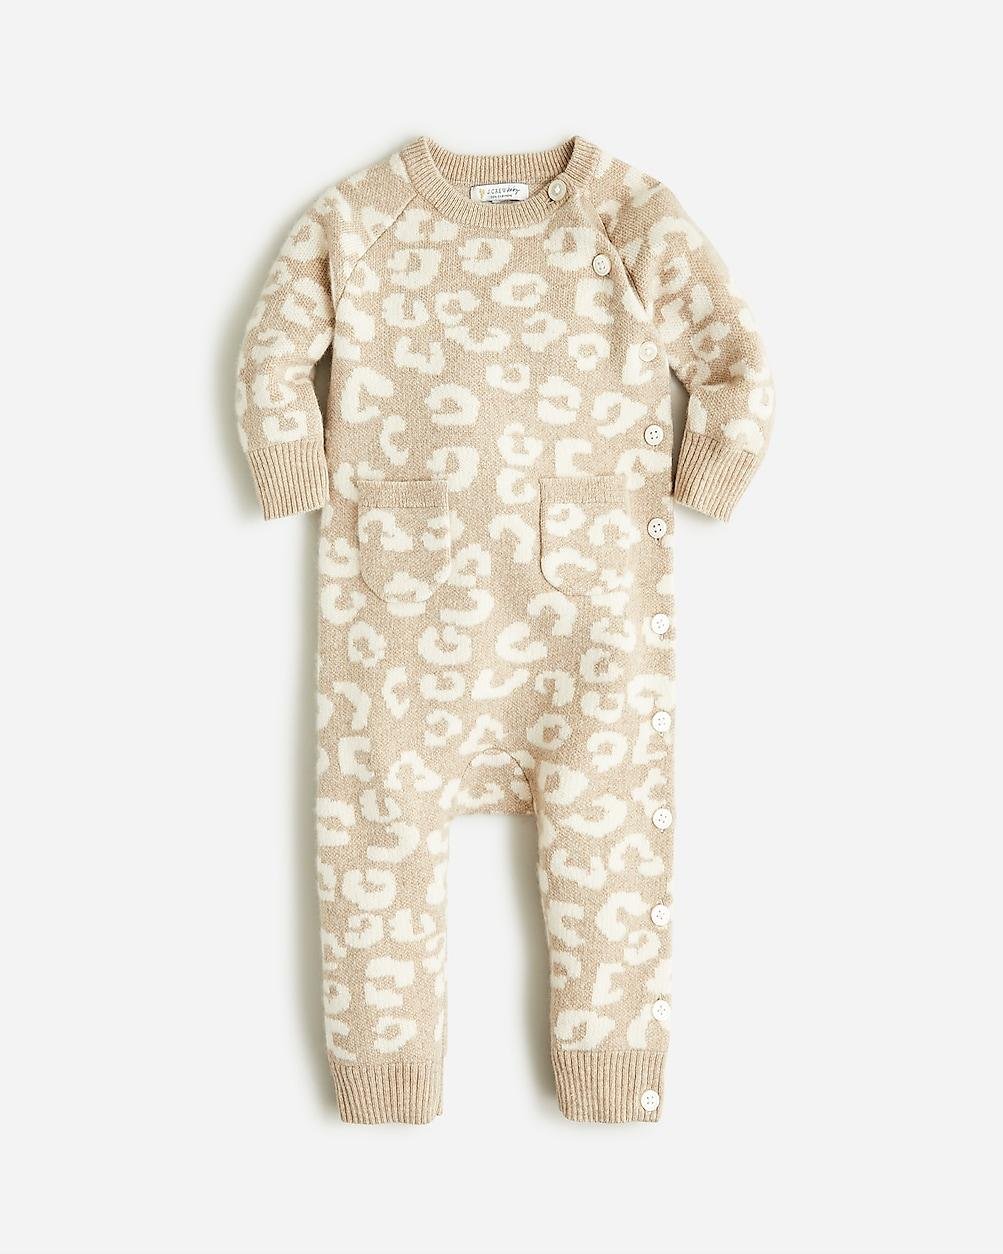 Limited-edition baby cashmere one-piece in leopard by J.CREW